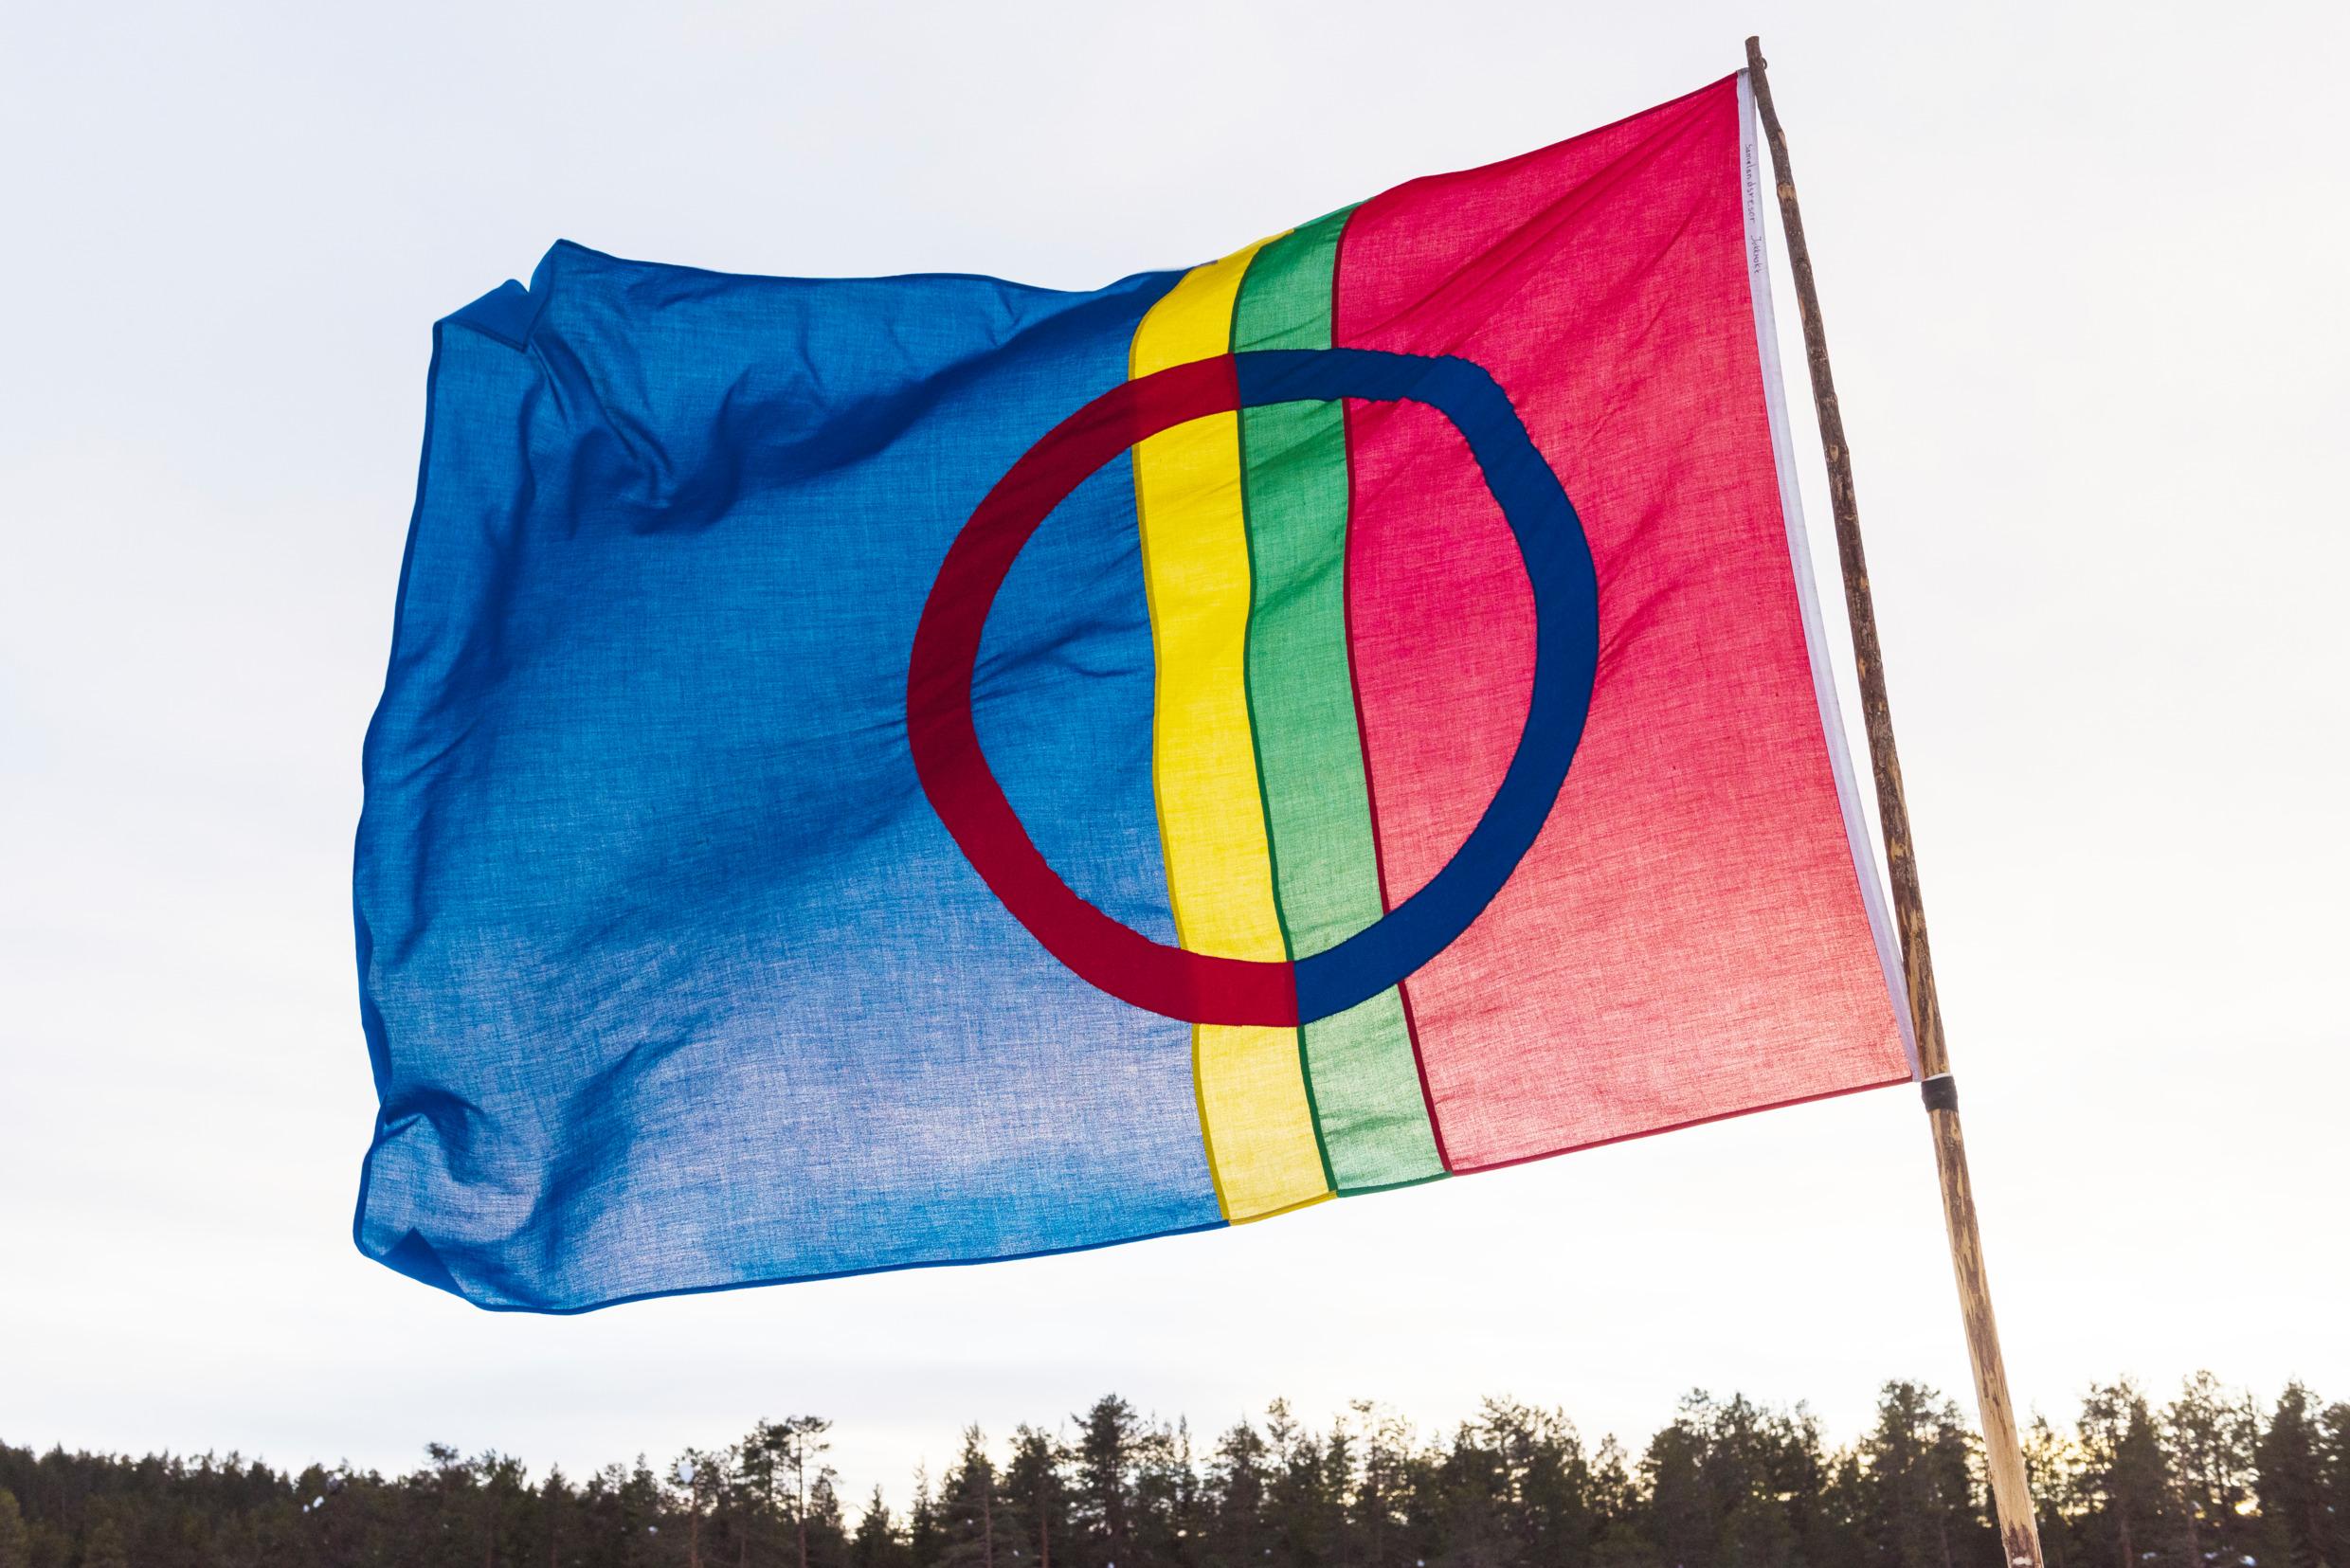 A Sami flag, red, green, yellow and blue with lines and a circle.